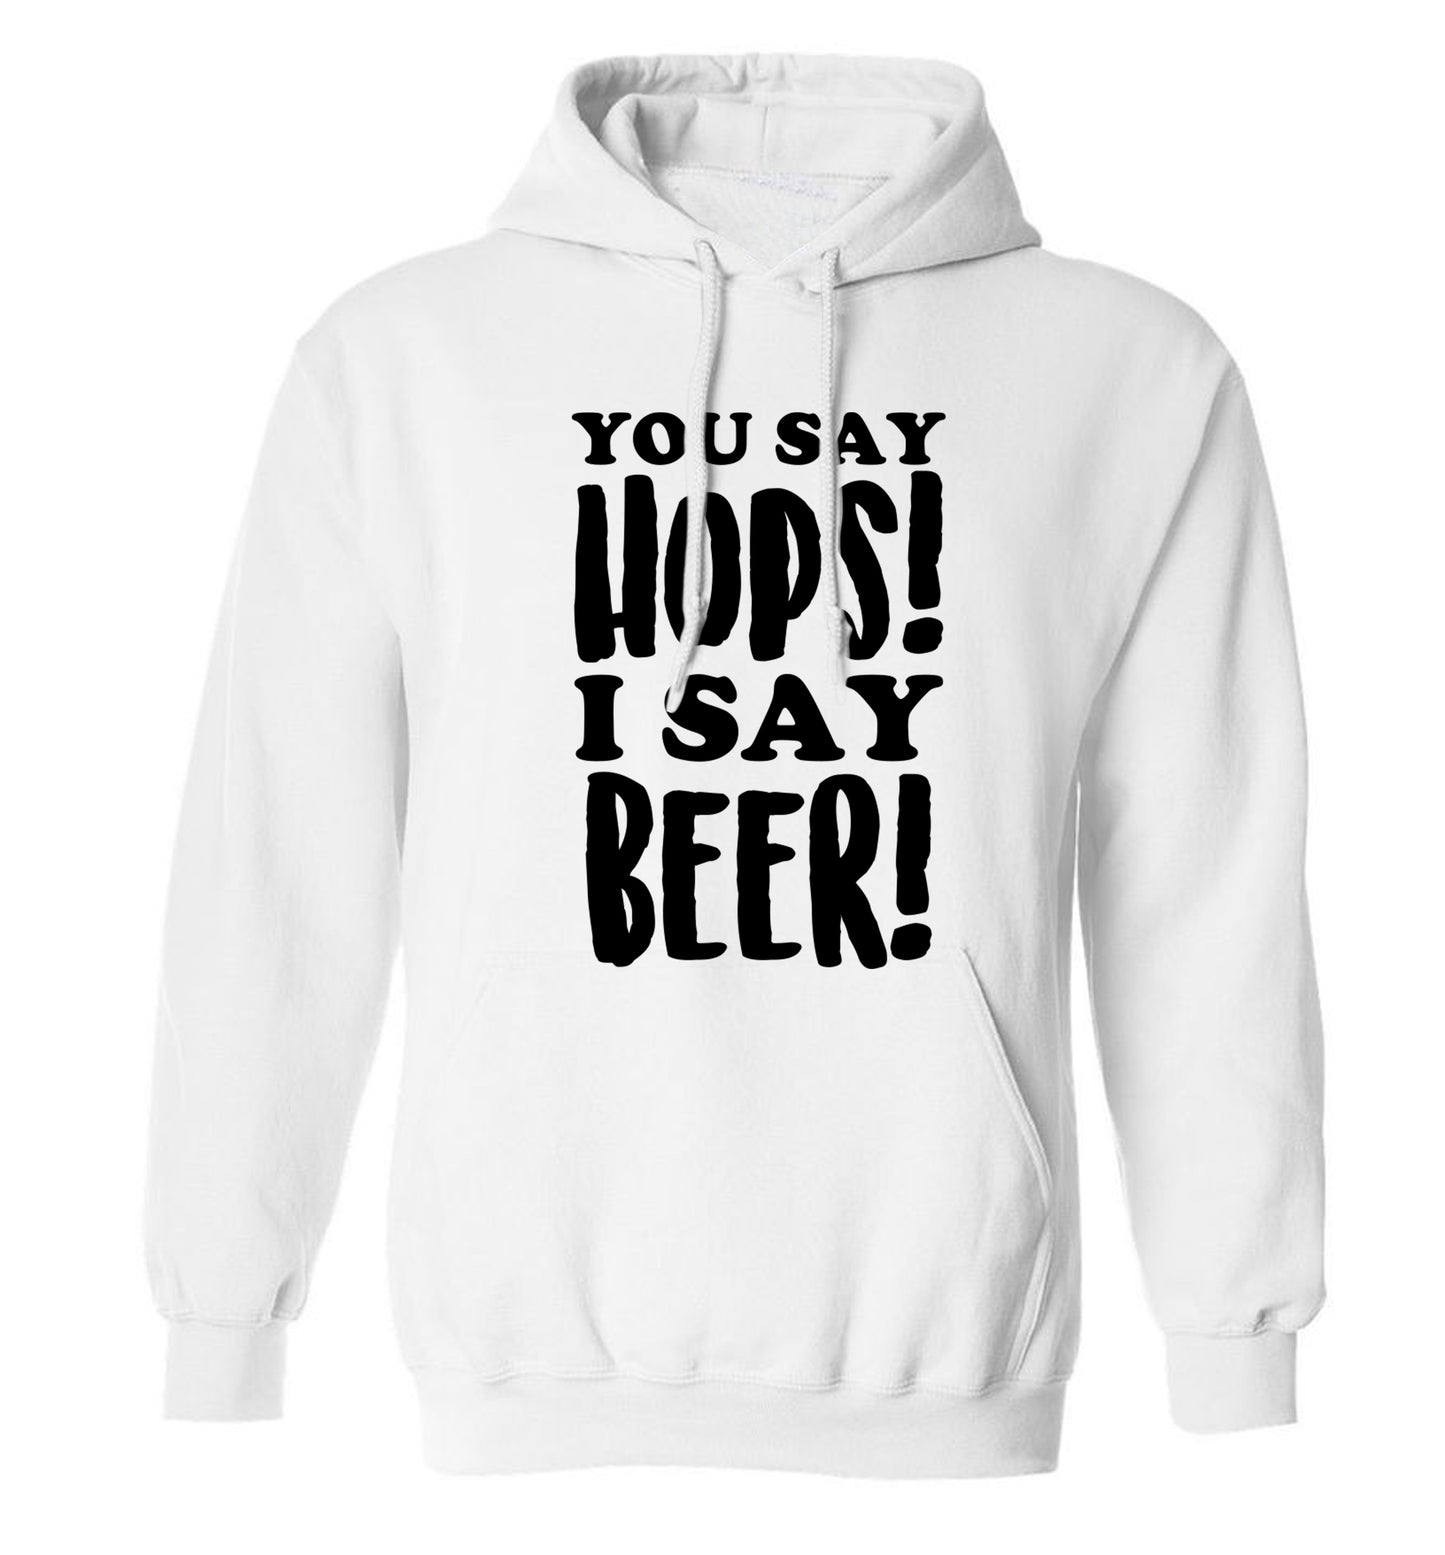 You say hops I say beer! adults unisex white hoodie 2XL